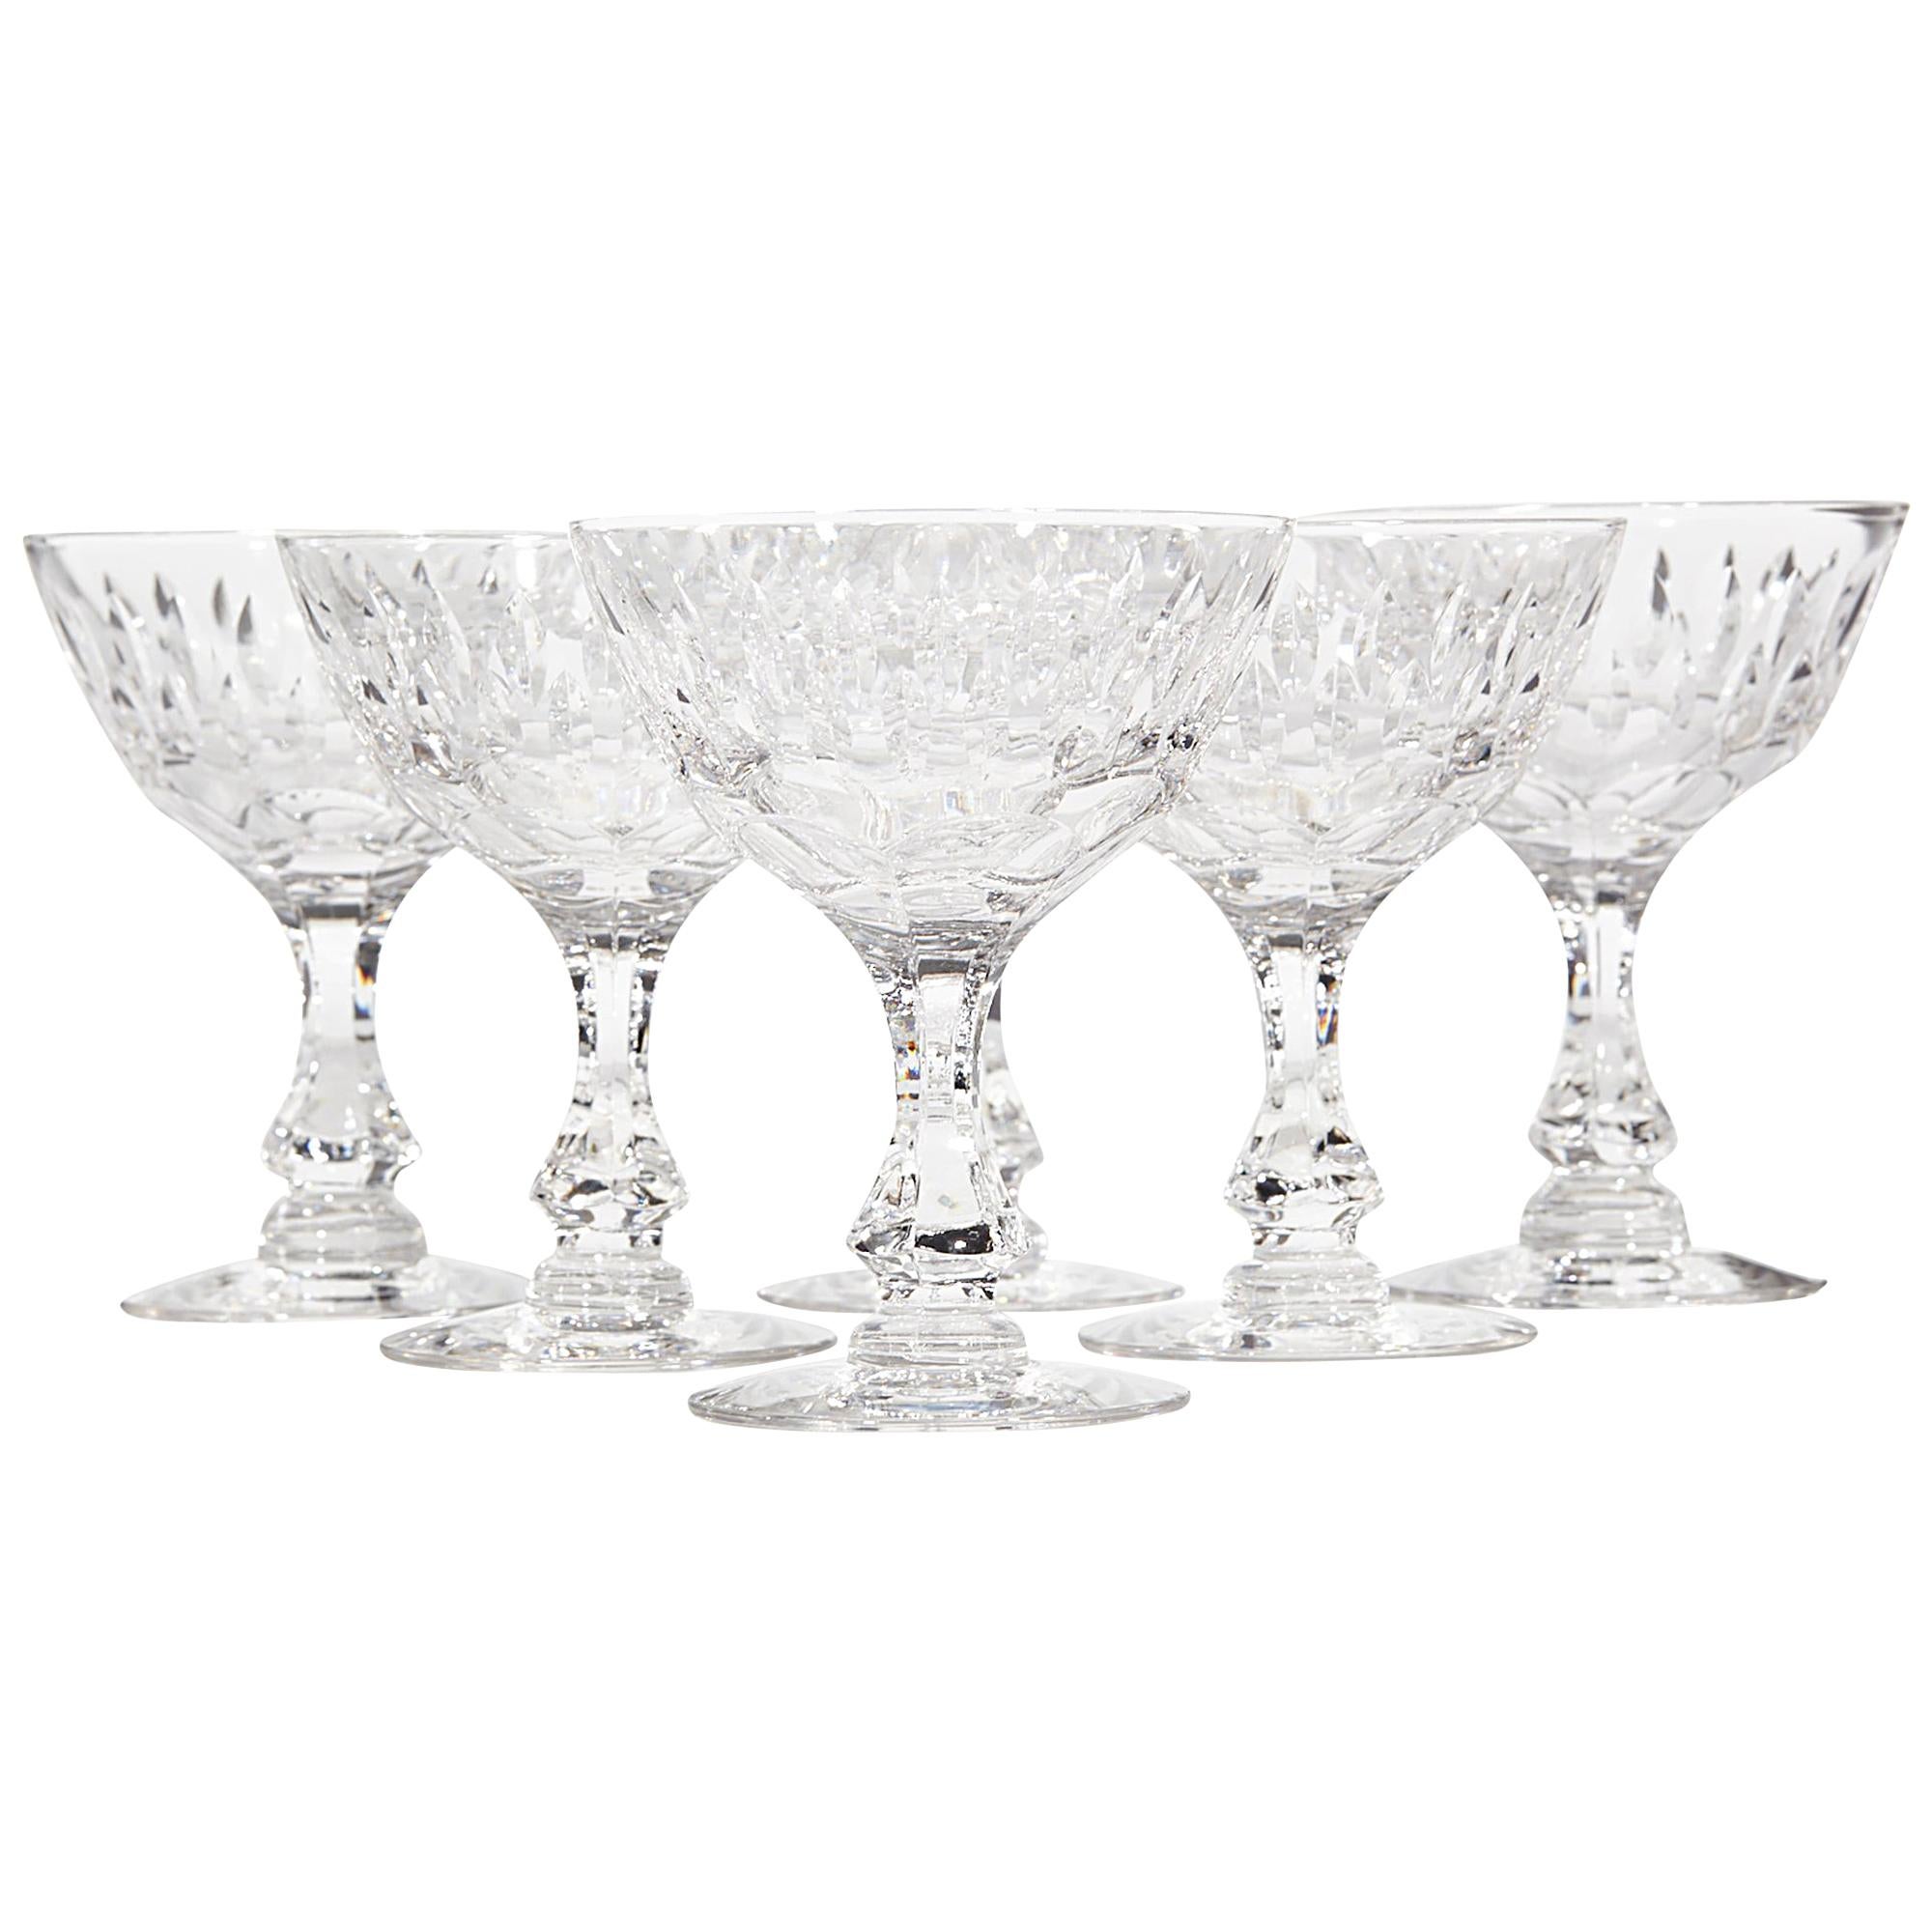 1950s Wheel-Cut Glass Coupes, Set of 6 For Sale